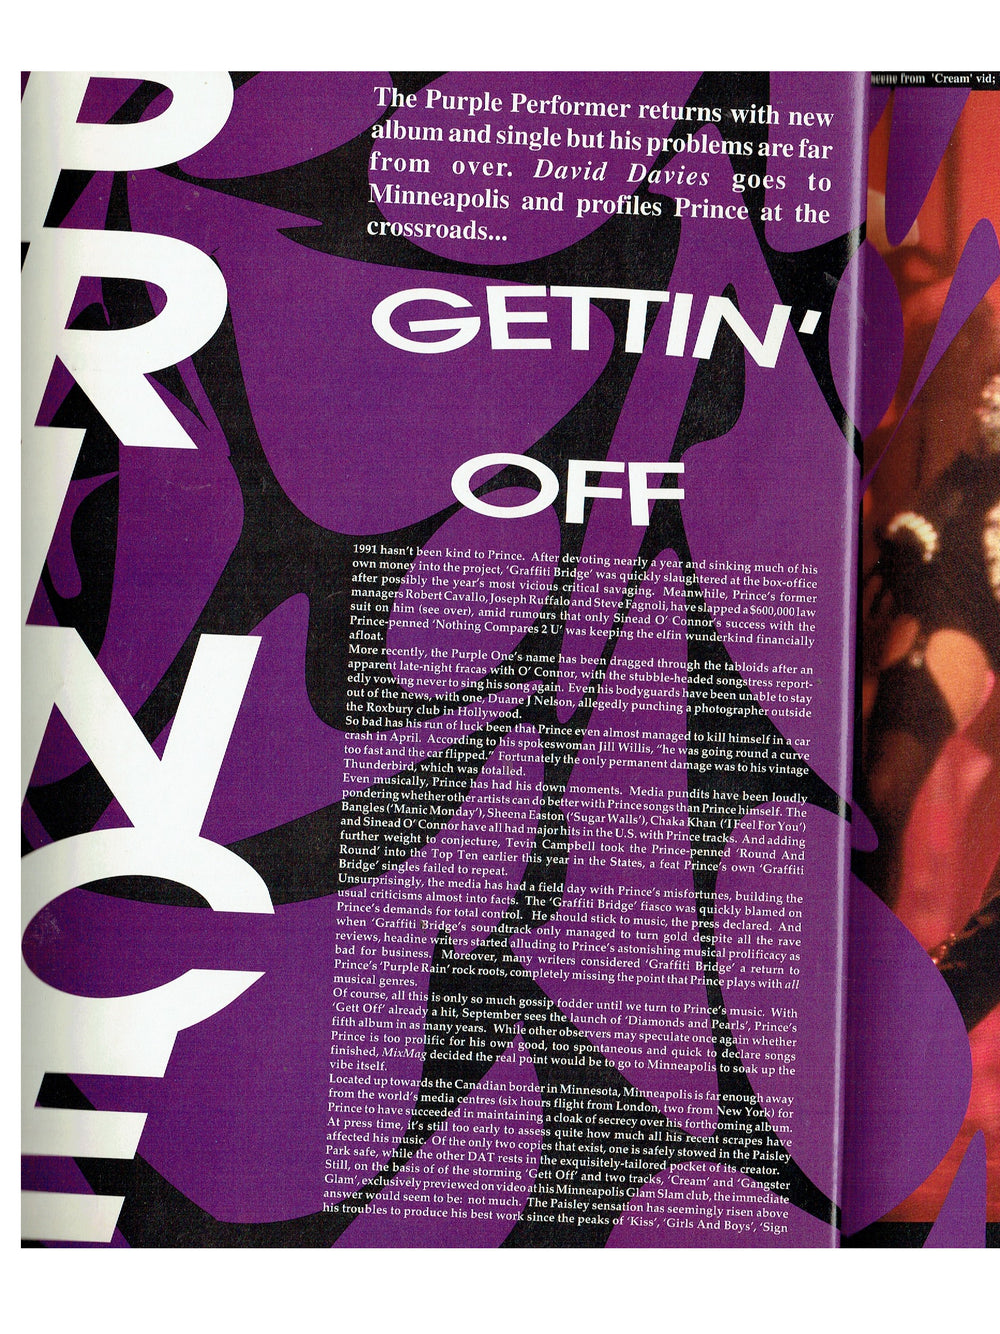 Prince – Mix Mag Magazine September 1991 Cover & 4 Page Article